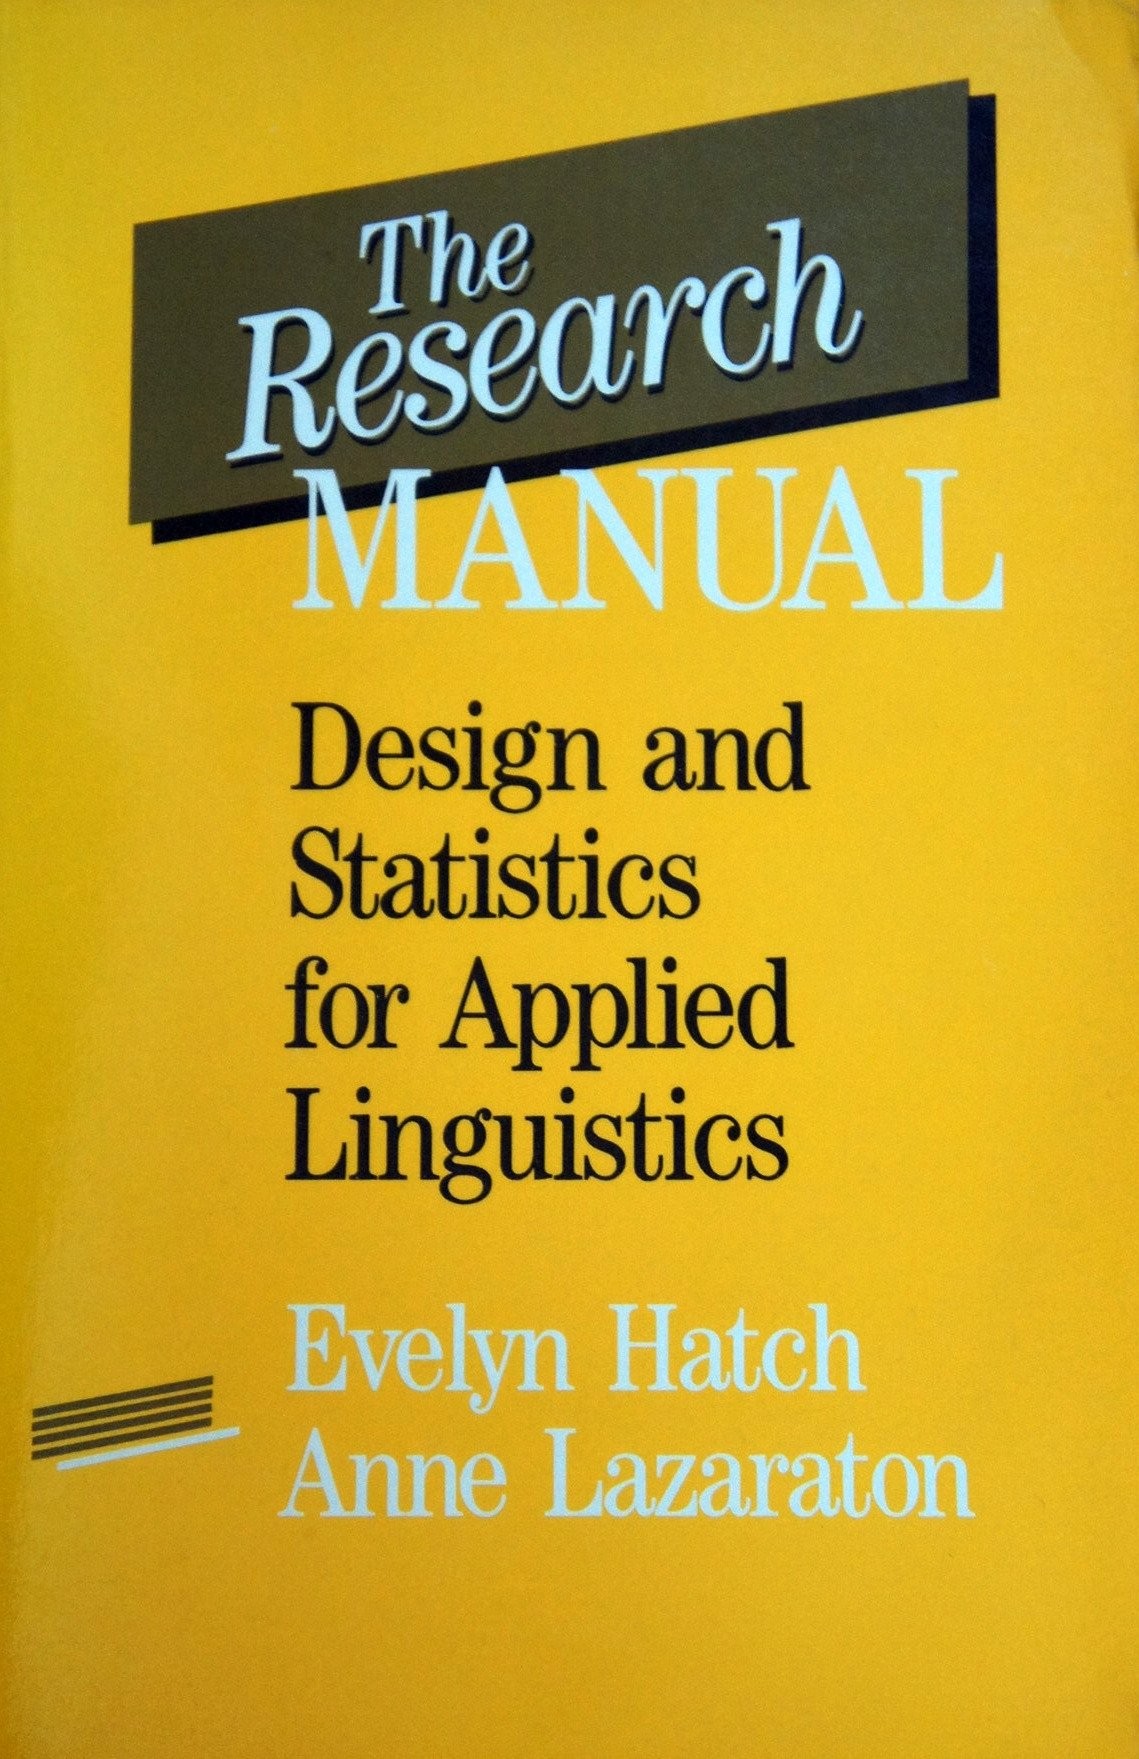 The Research Manual: Design and Statistics for Applied Linguistics